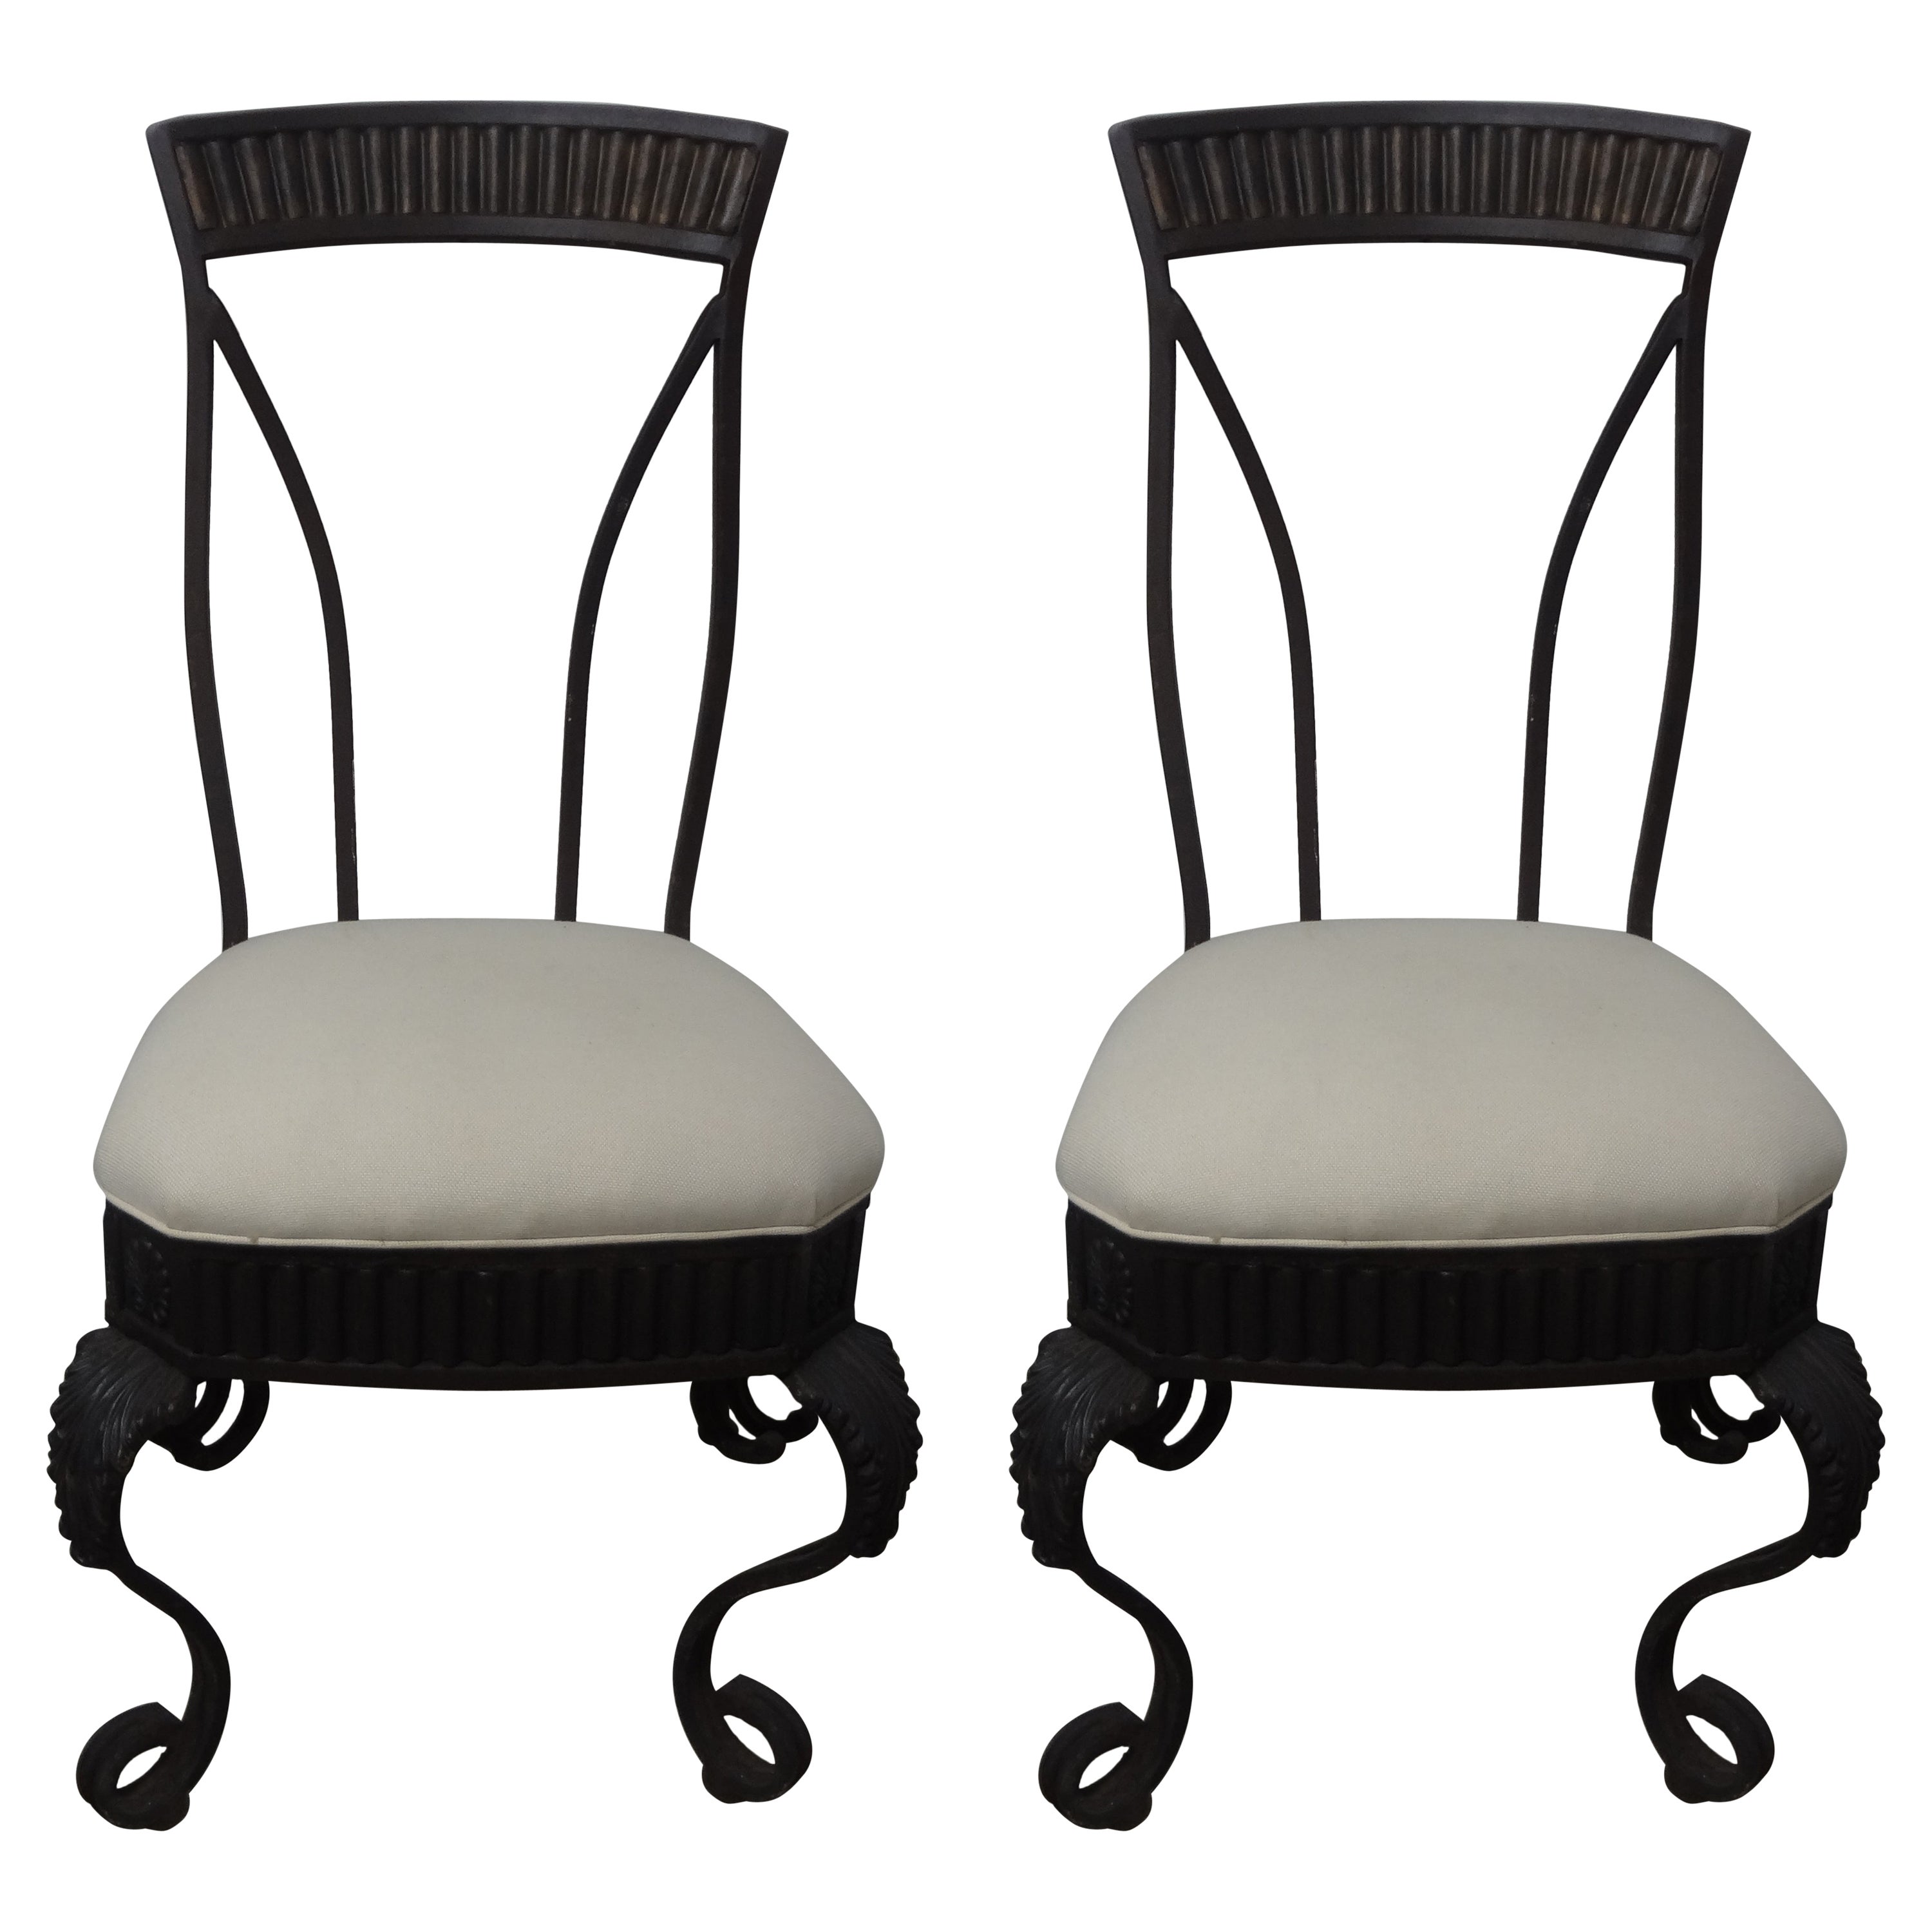 Pair Of Italian Wrought Iron Garden Chairs For Sale